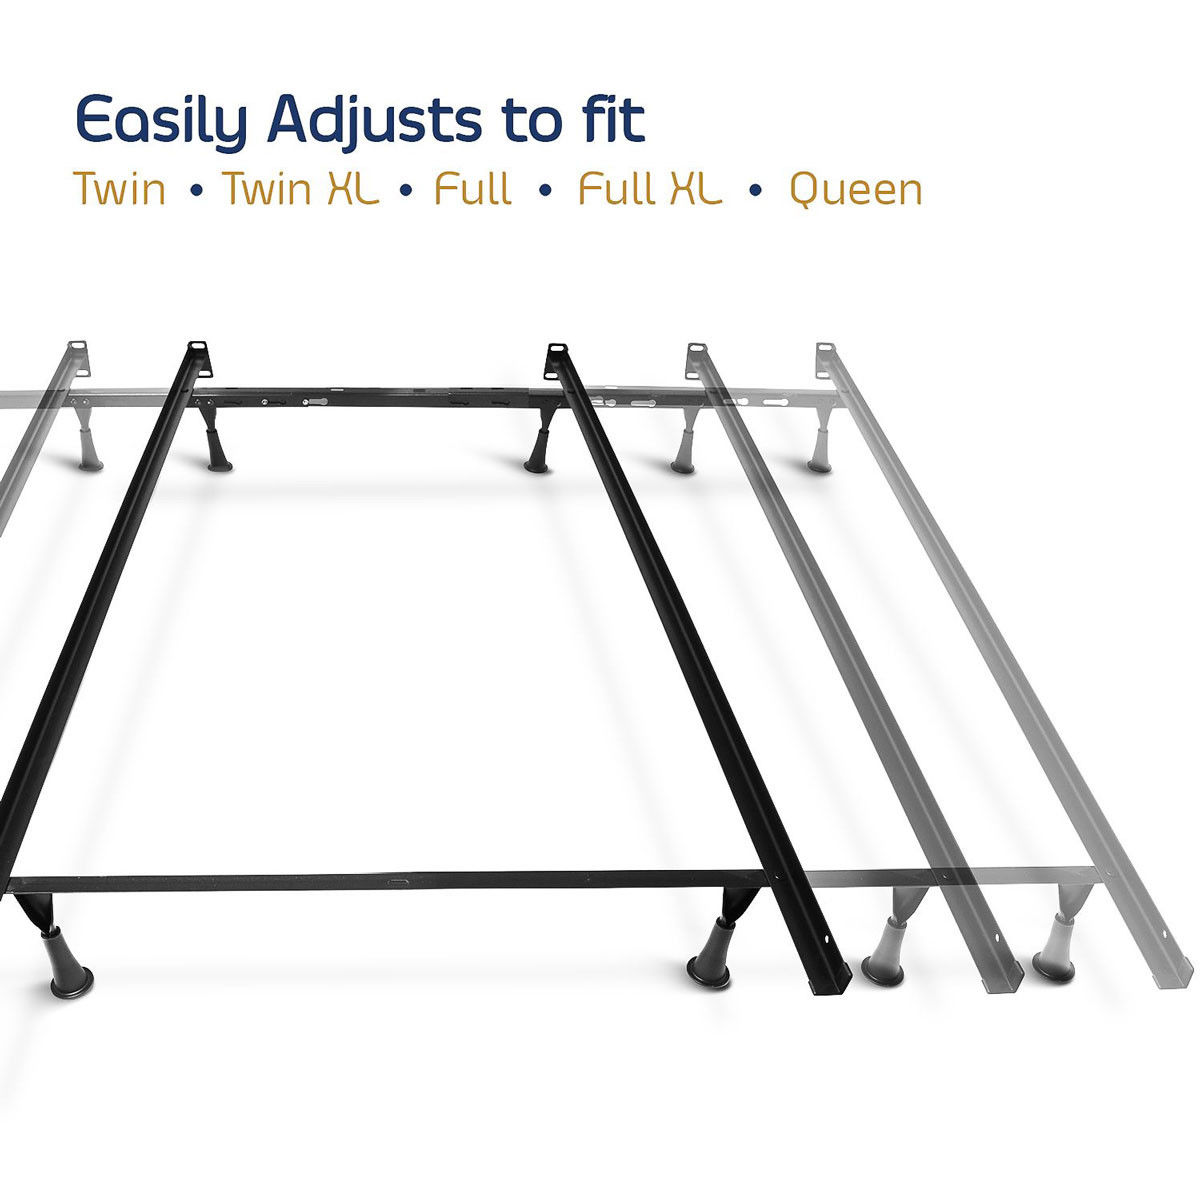 Do the metal bed frame pieces have any special support features?